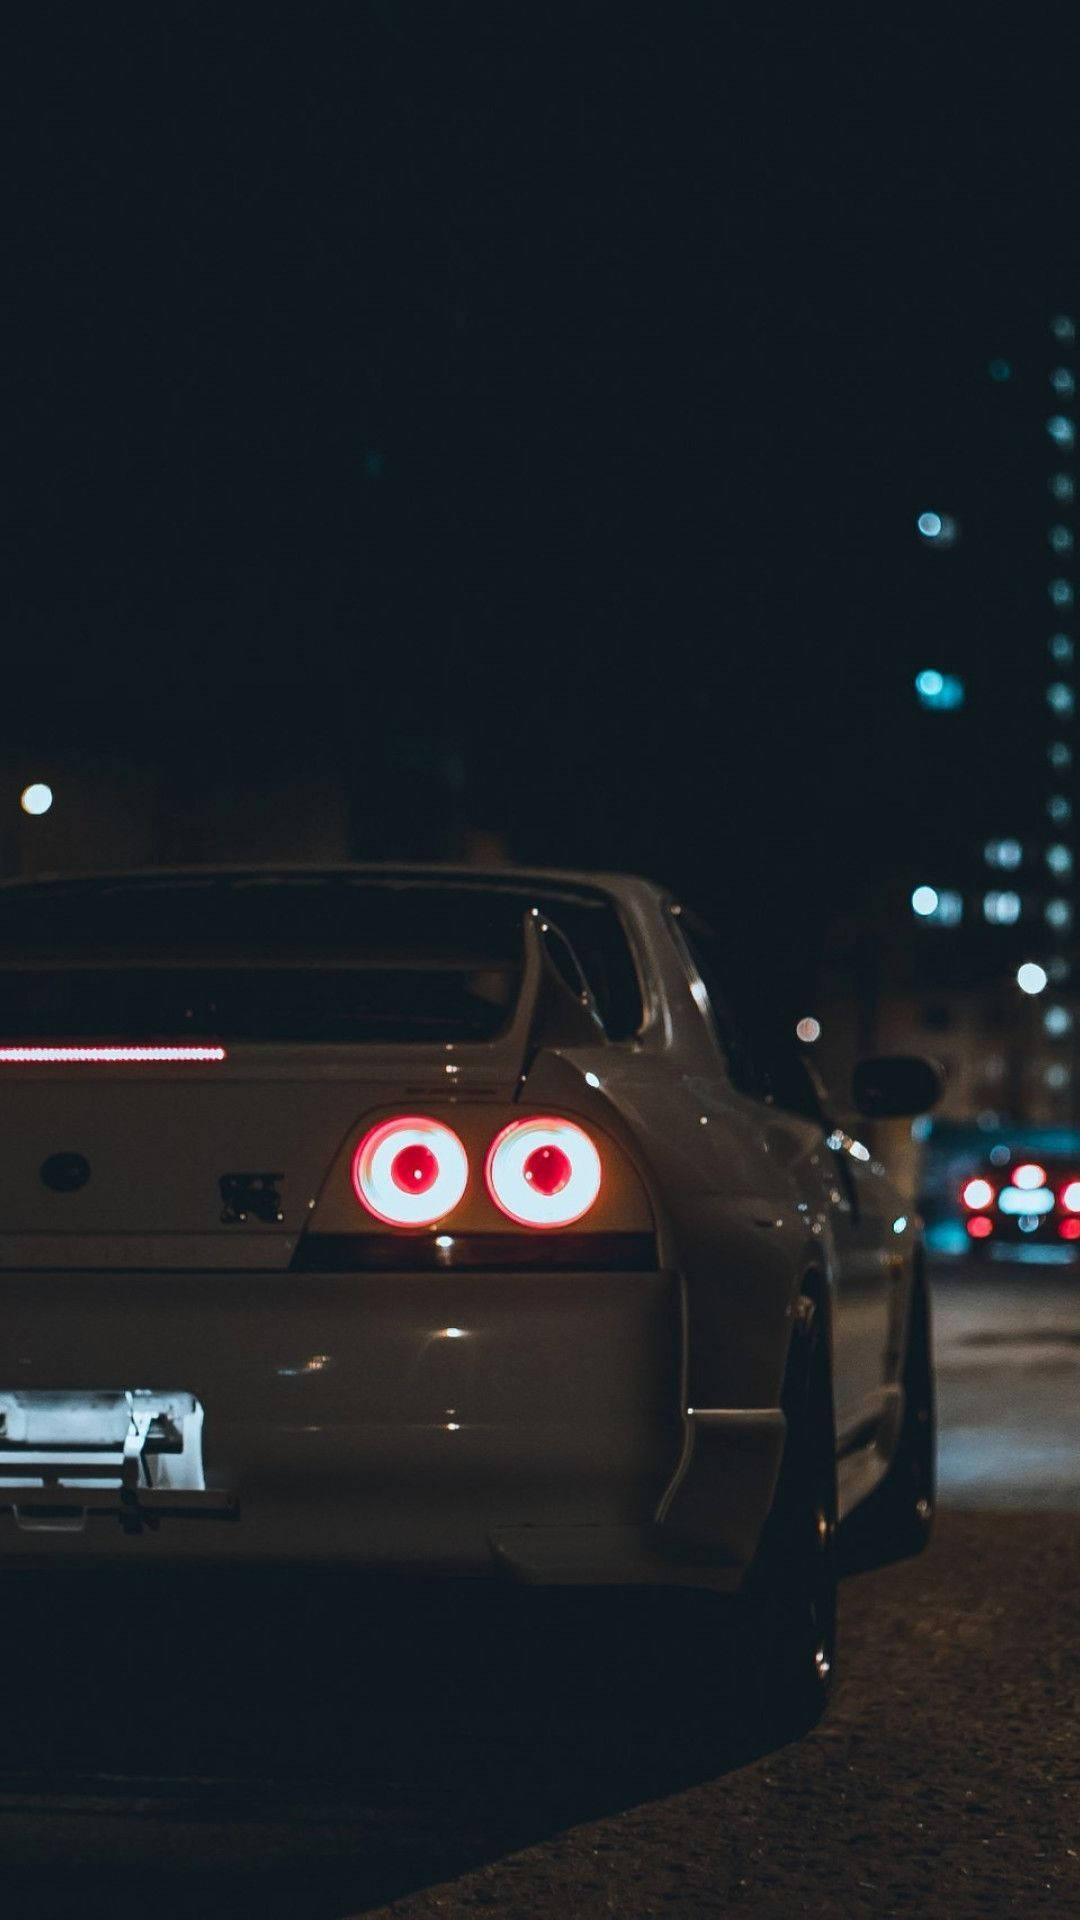 Gt-r Jdm Aesthetic Background